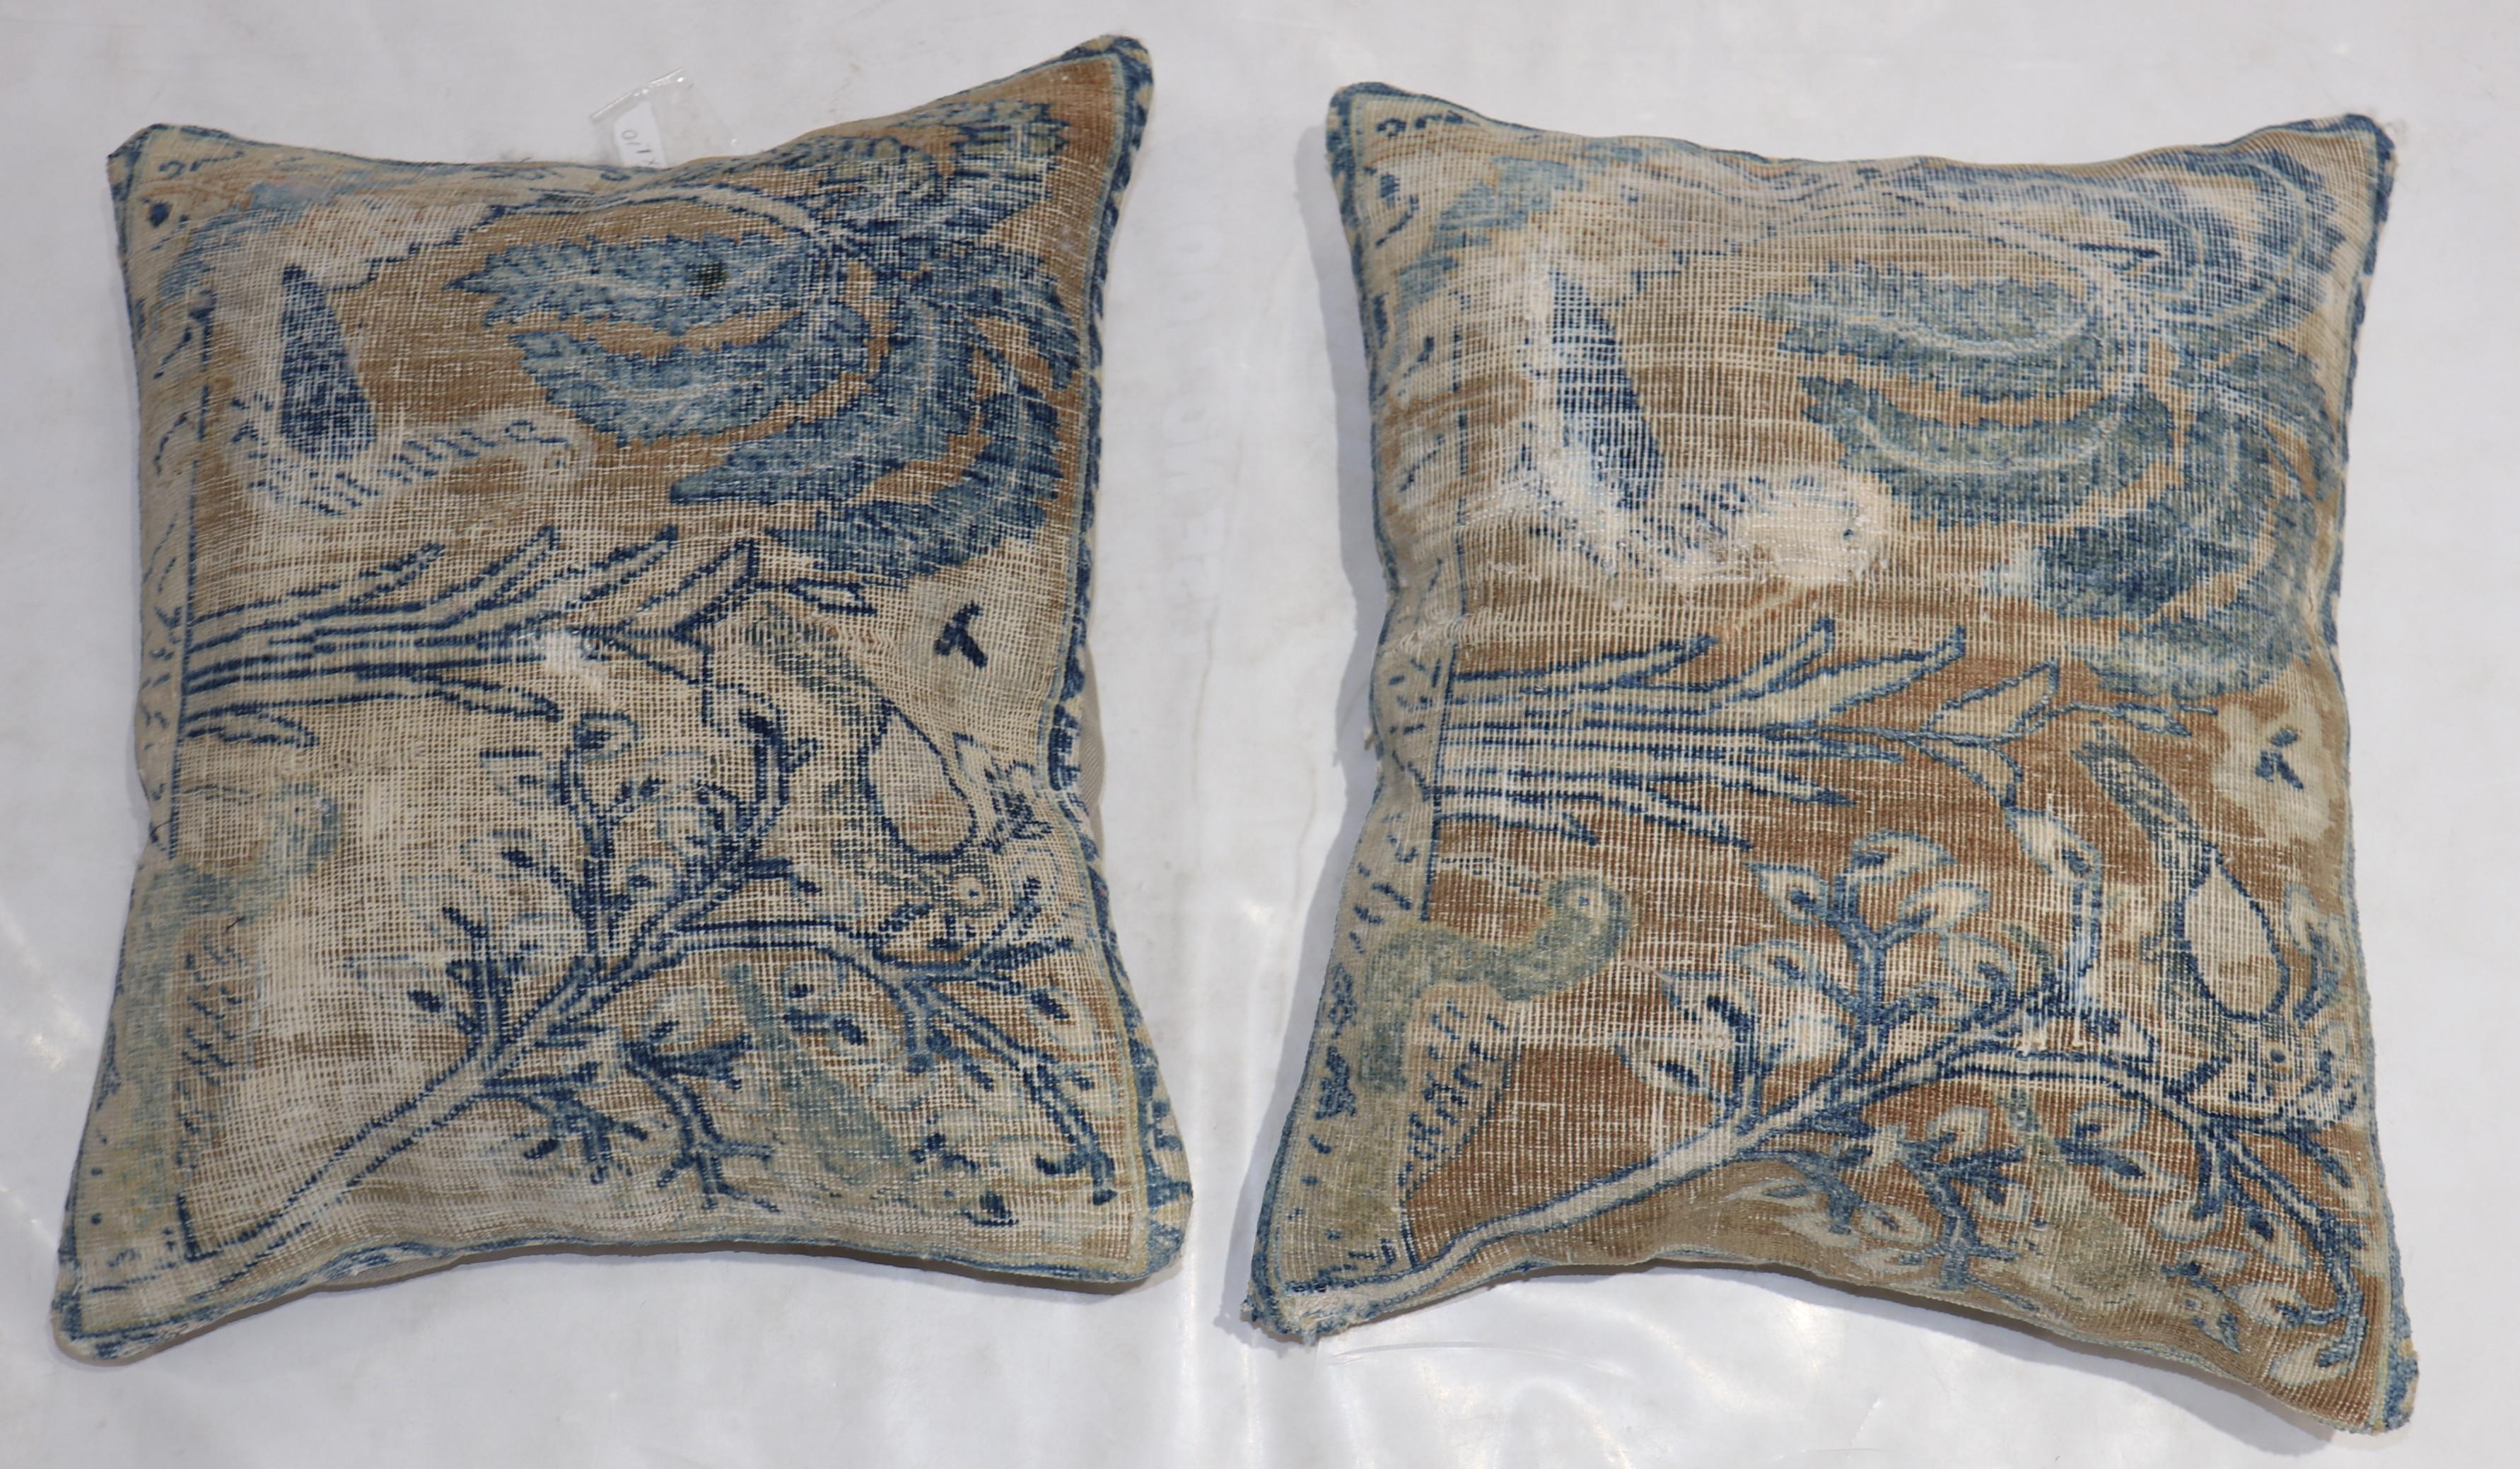 Set of pillows made from a 19th century Persian Tabriz Pictorial rug. Each pillow has a polyfill insert and zipper closure

Both measure 19'' x 22''.